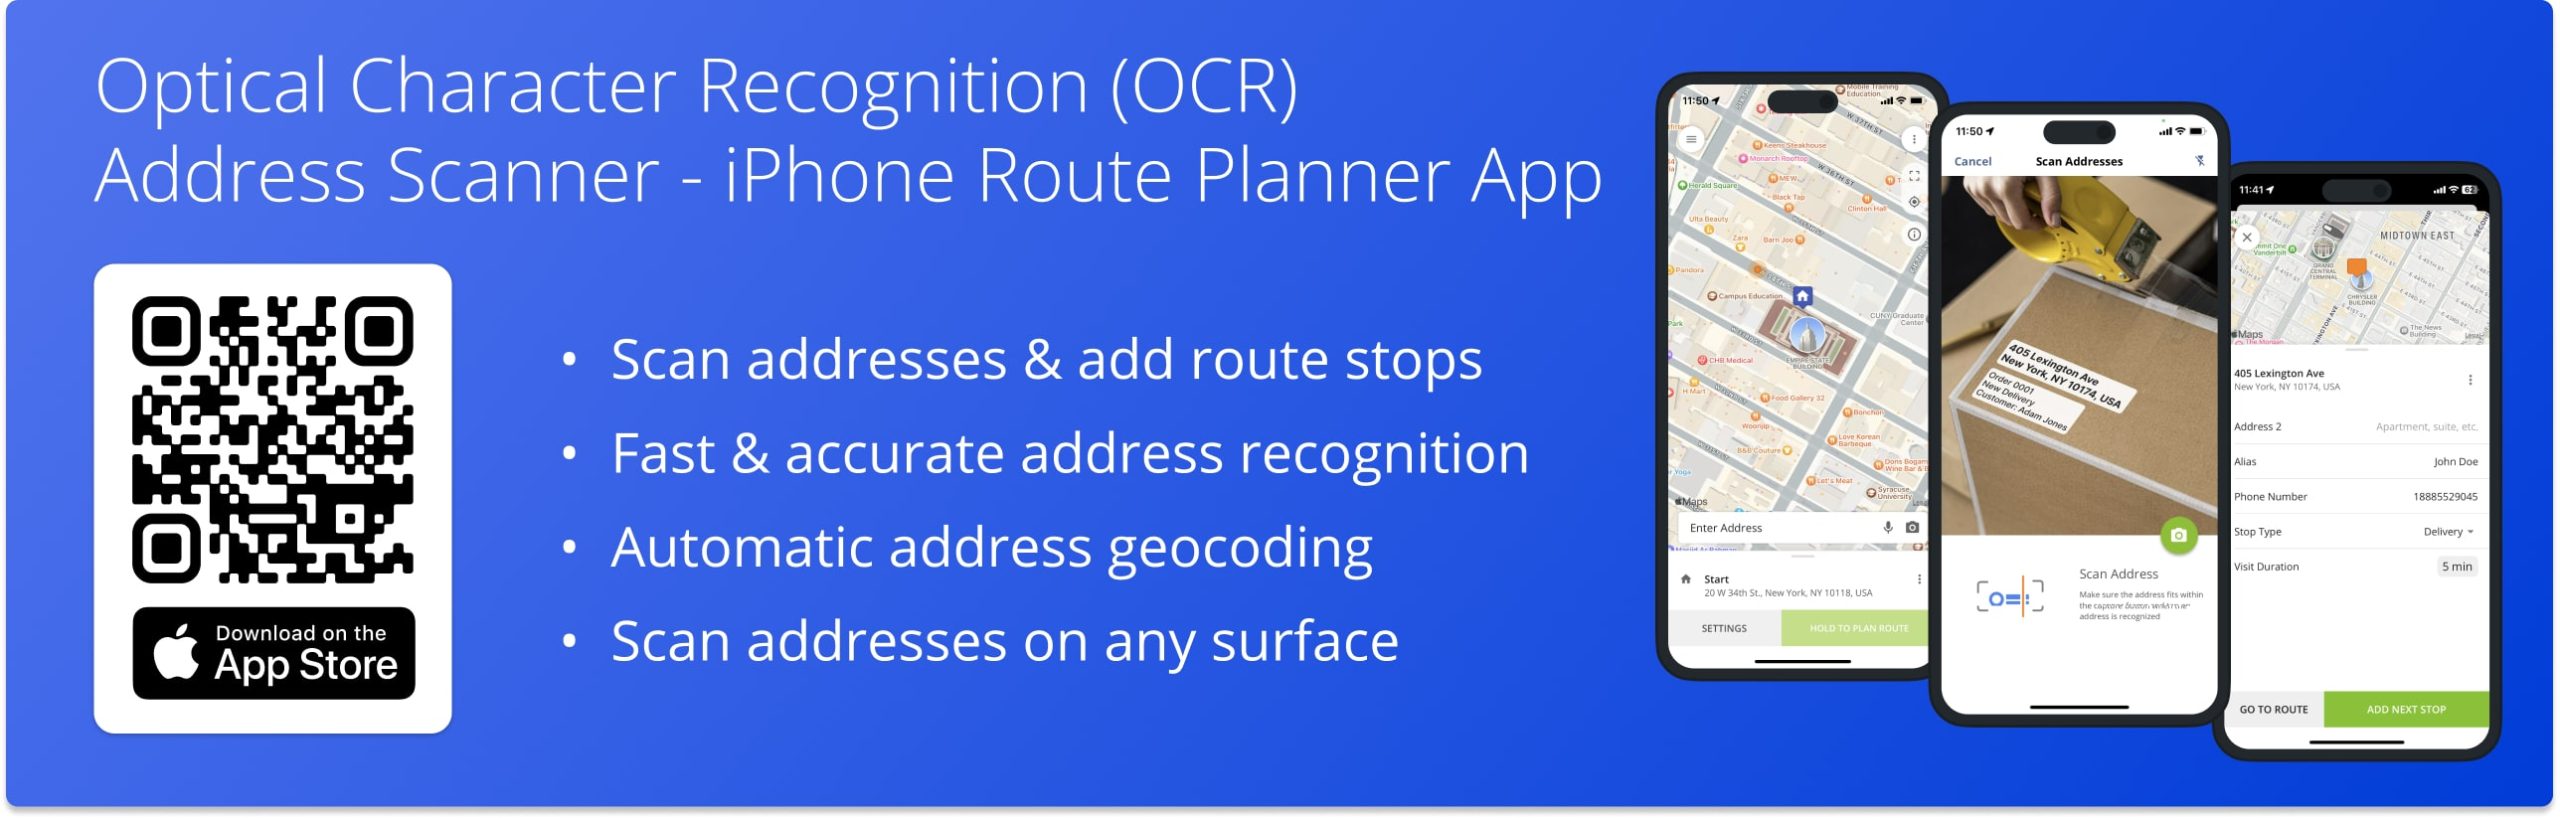 Optical character recognition (OCR) address scanner on Route4Me's iPhone Route Planner app for drivers.